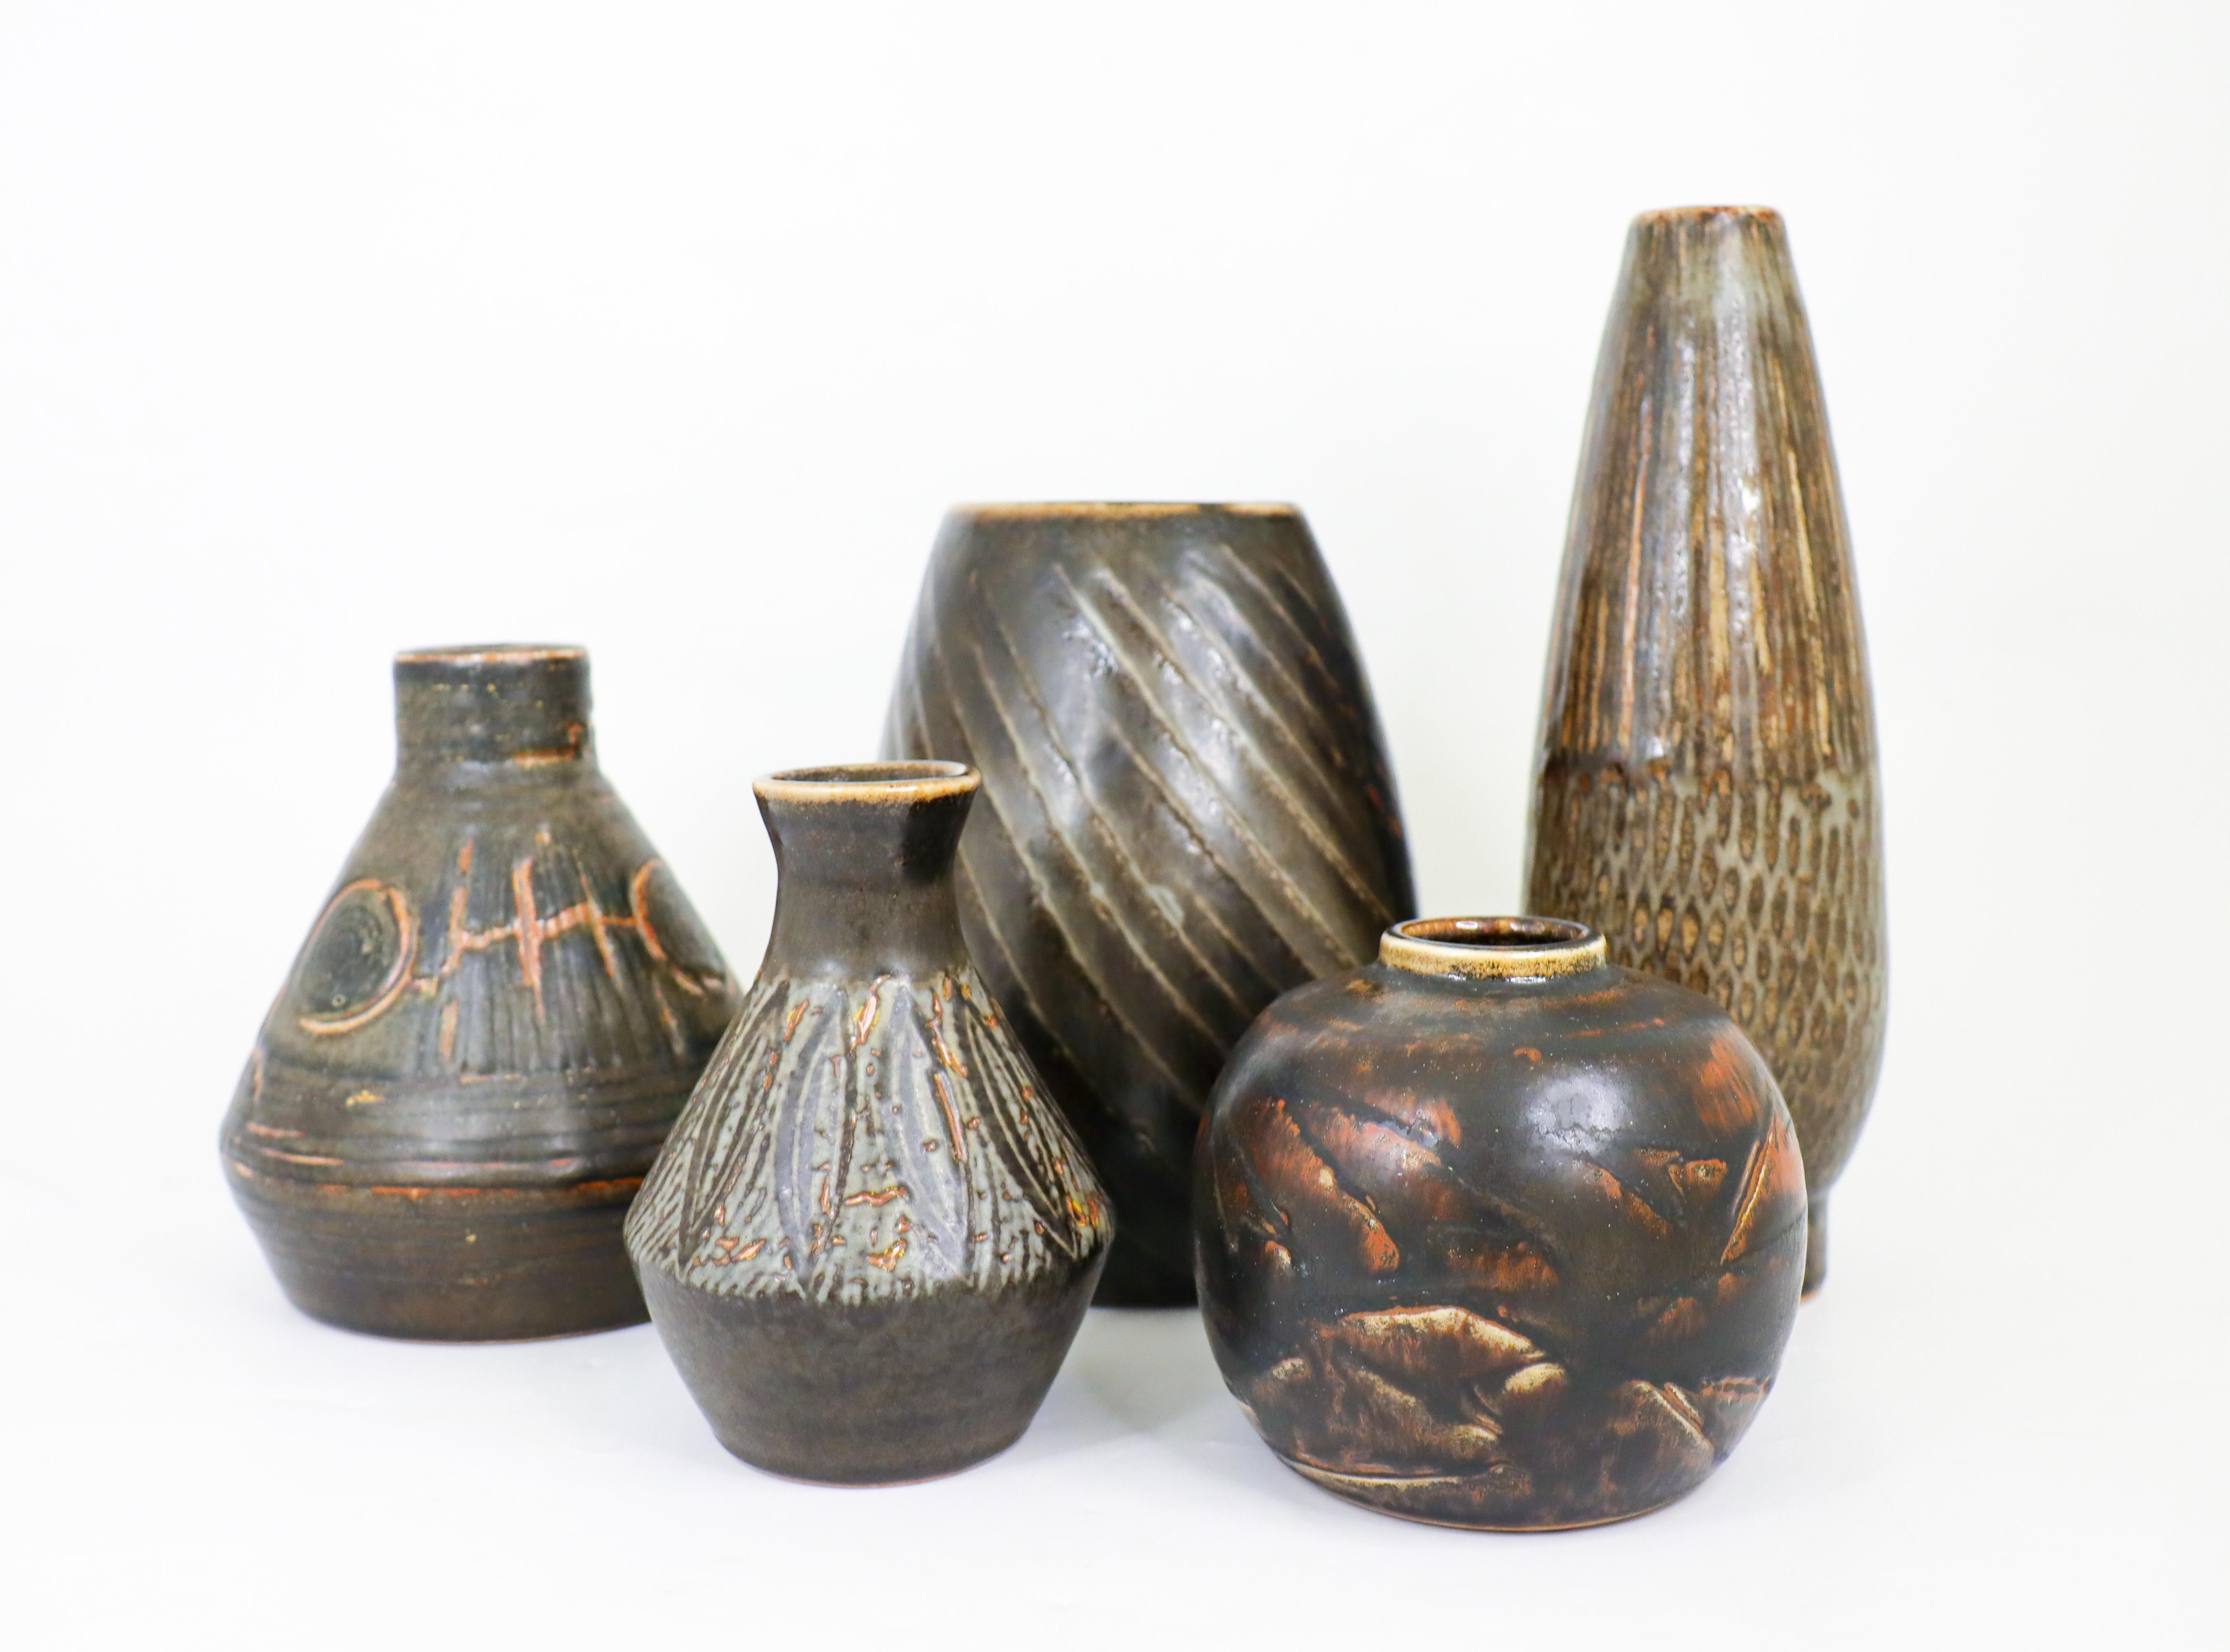 A group of five dark brown / black vases with a stunning glaze designed by Carl-Harry Stålhane at Rörstrand in the 1950s and 1960s. The vases are between  11.5 - 2475 cm high and in excellent condition. Three of the vases is 2nd quality and the